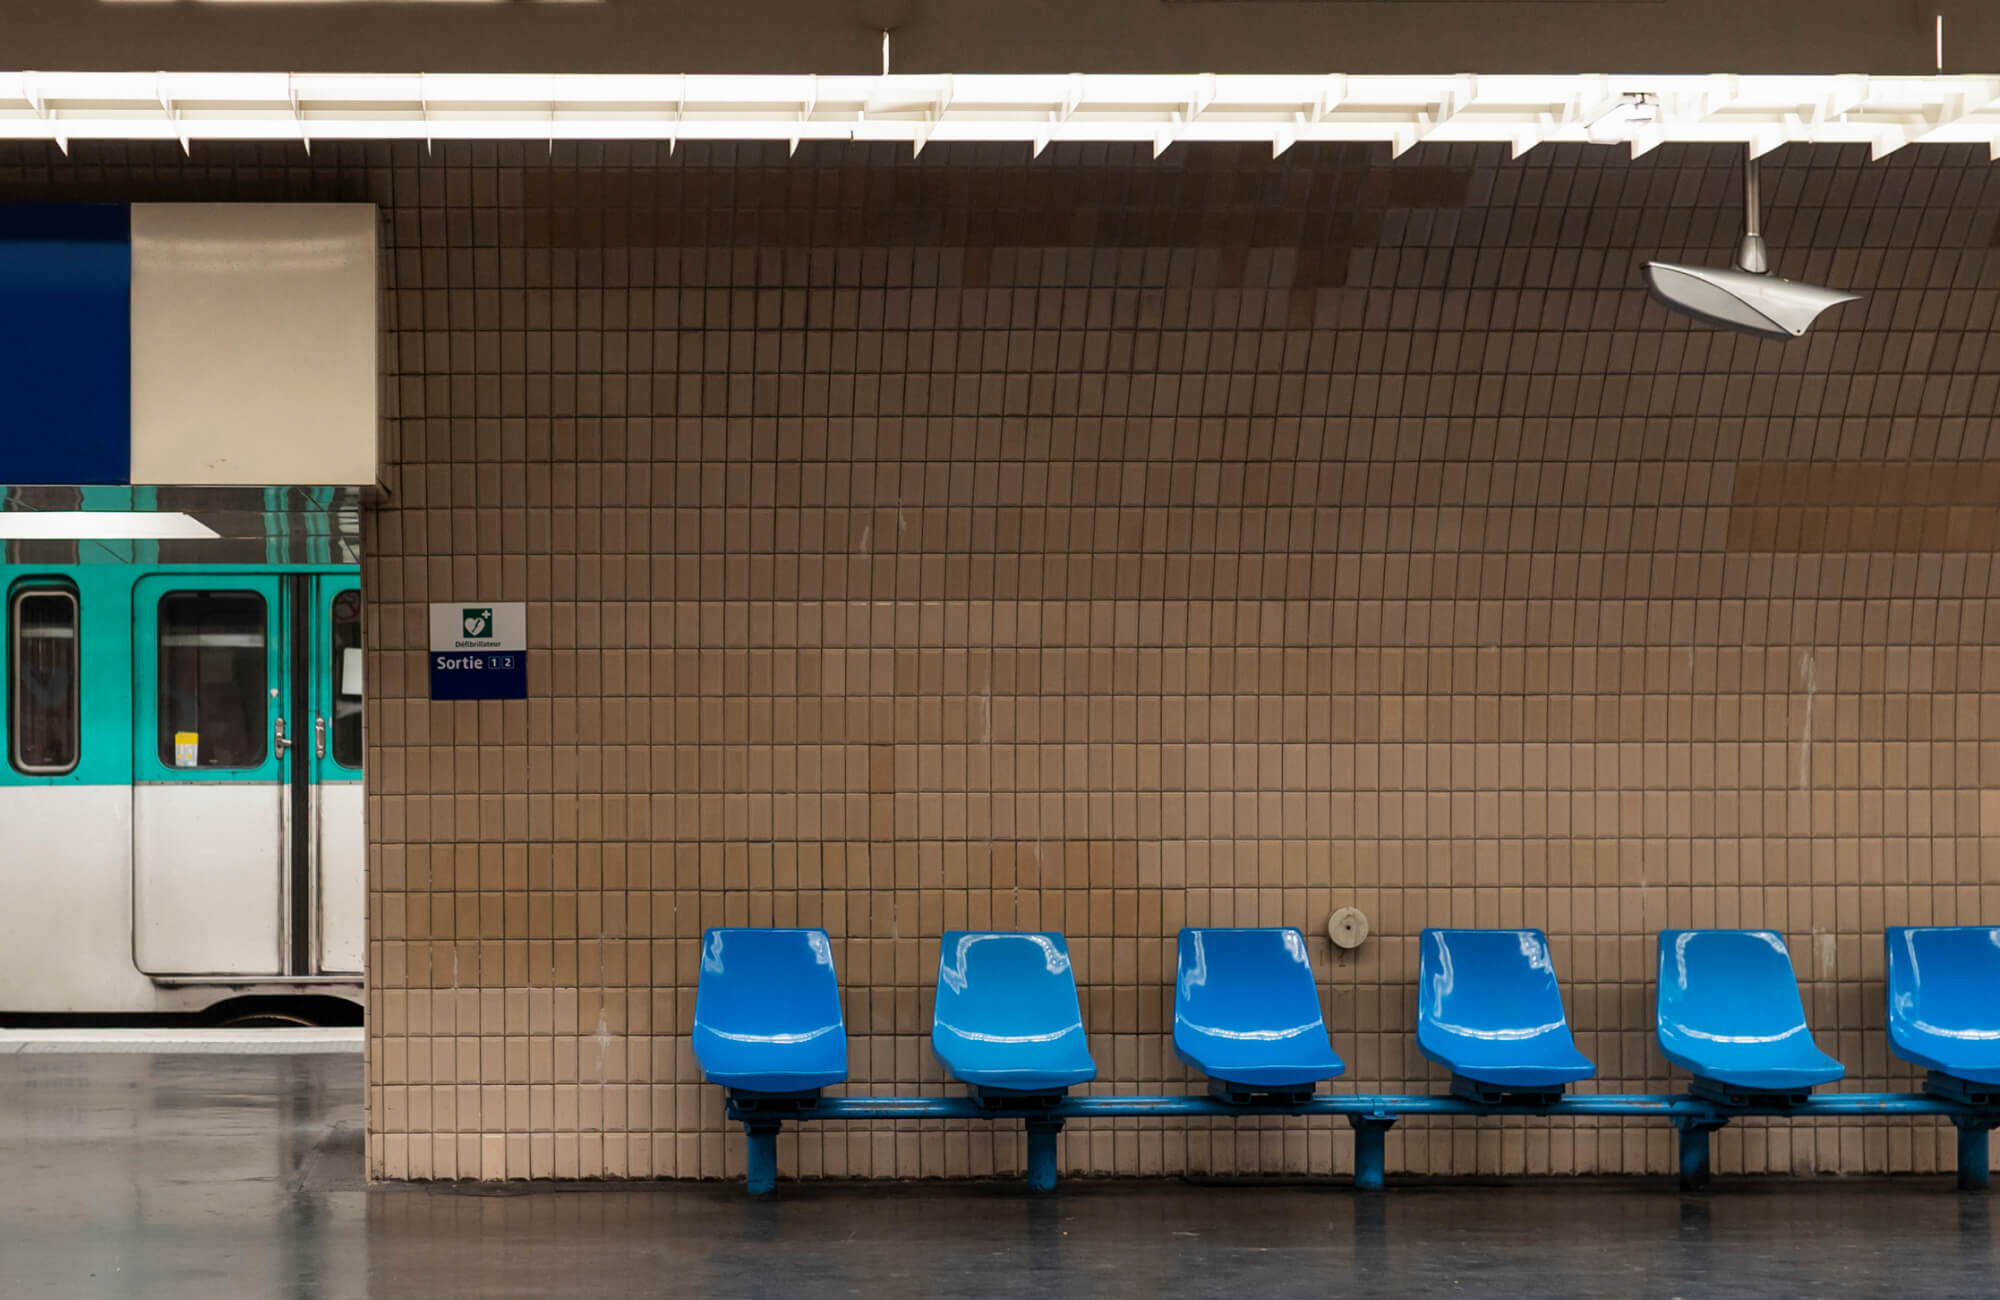 A subway platform with beige tile walls, blue plastic seats, and a teal metro train in the background.